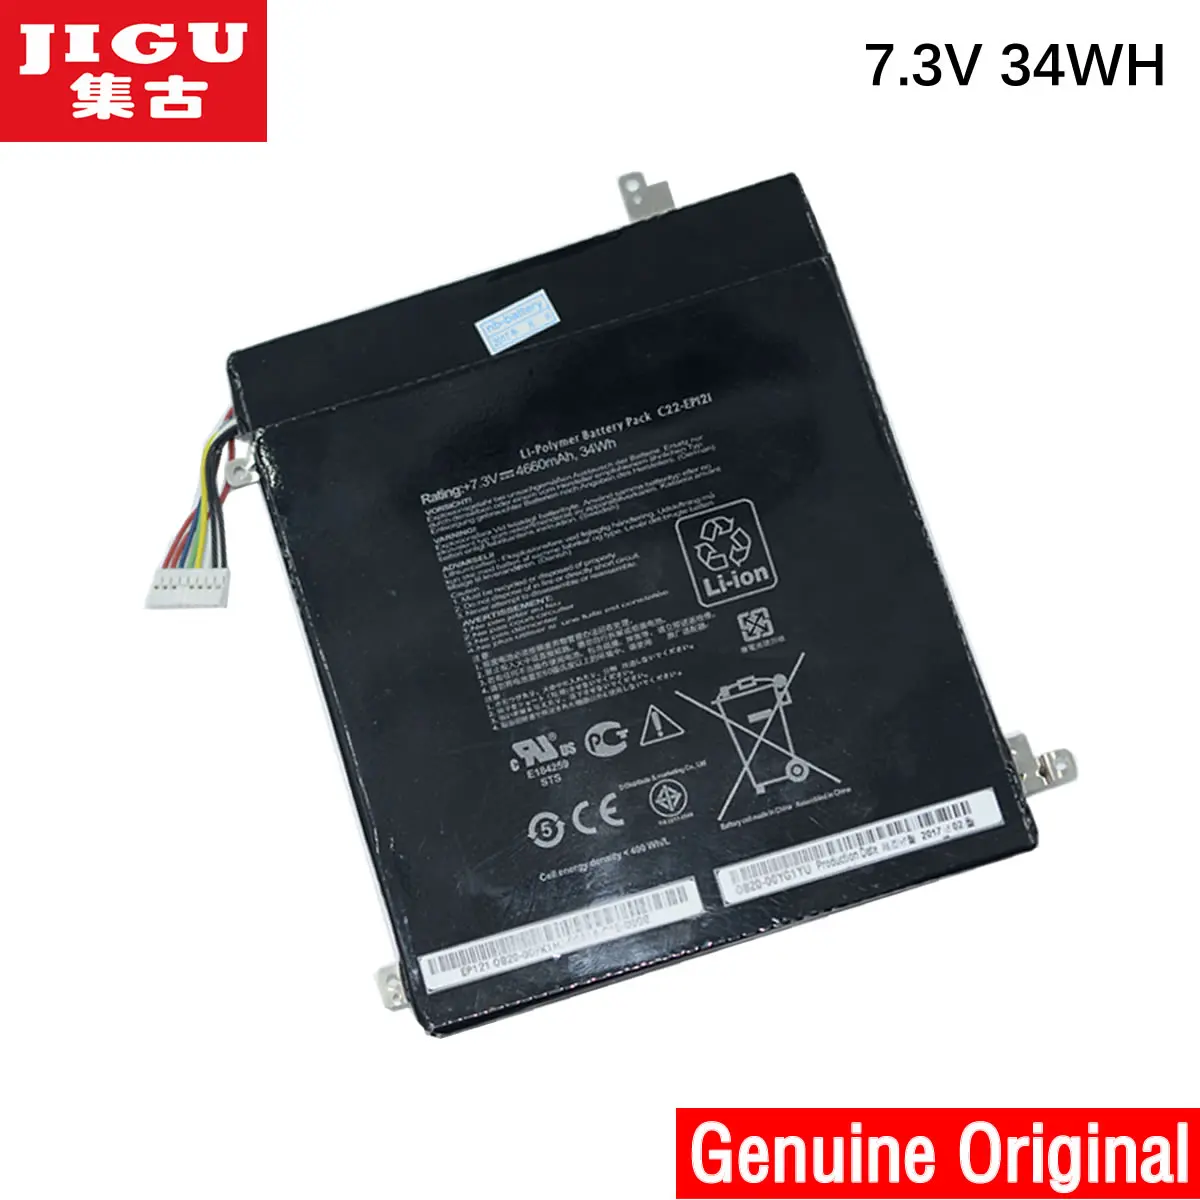 

JIGU Original Laptop Battery C22-EP121 For ASUS For Eee Pad B121 Tablet PC Series Slate EP121 B121-A1 EP121